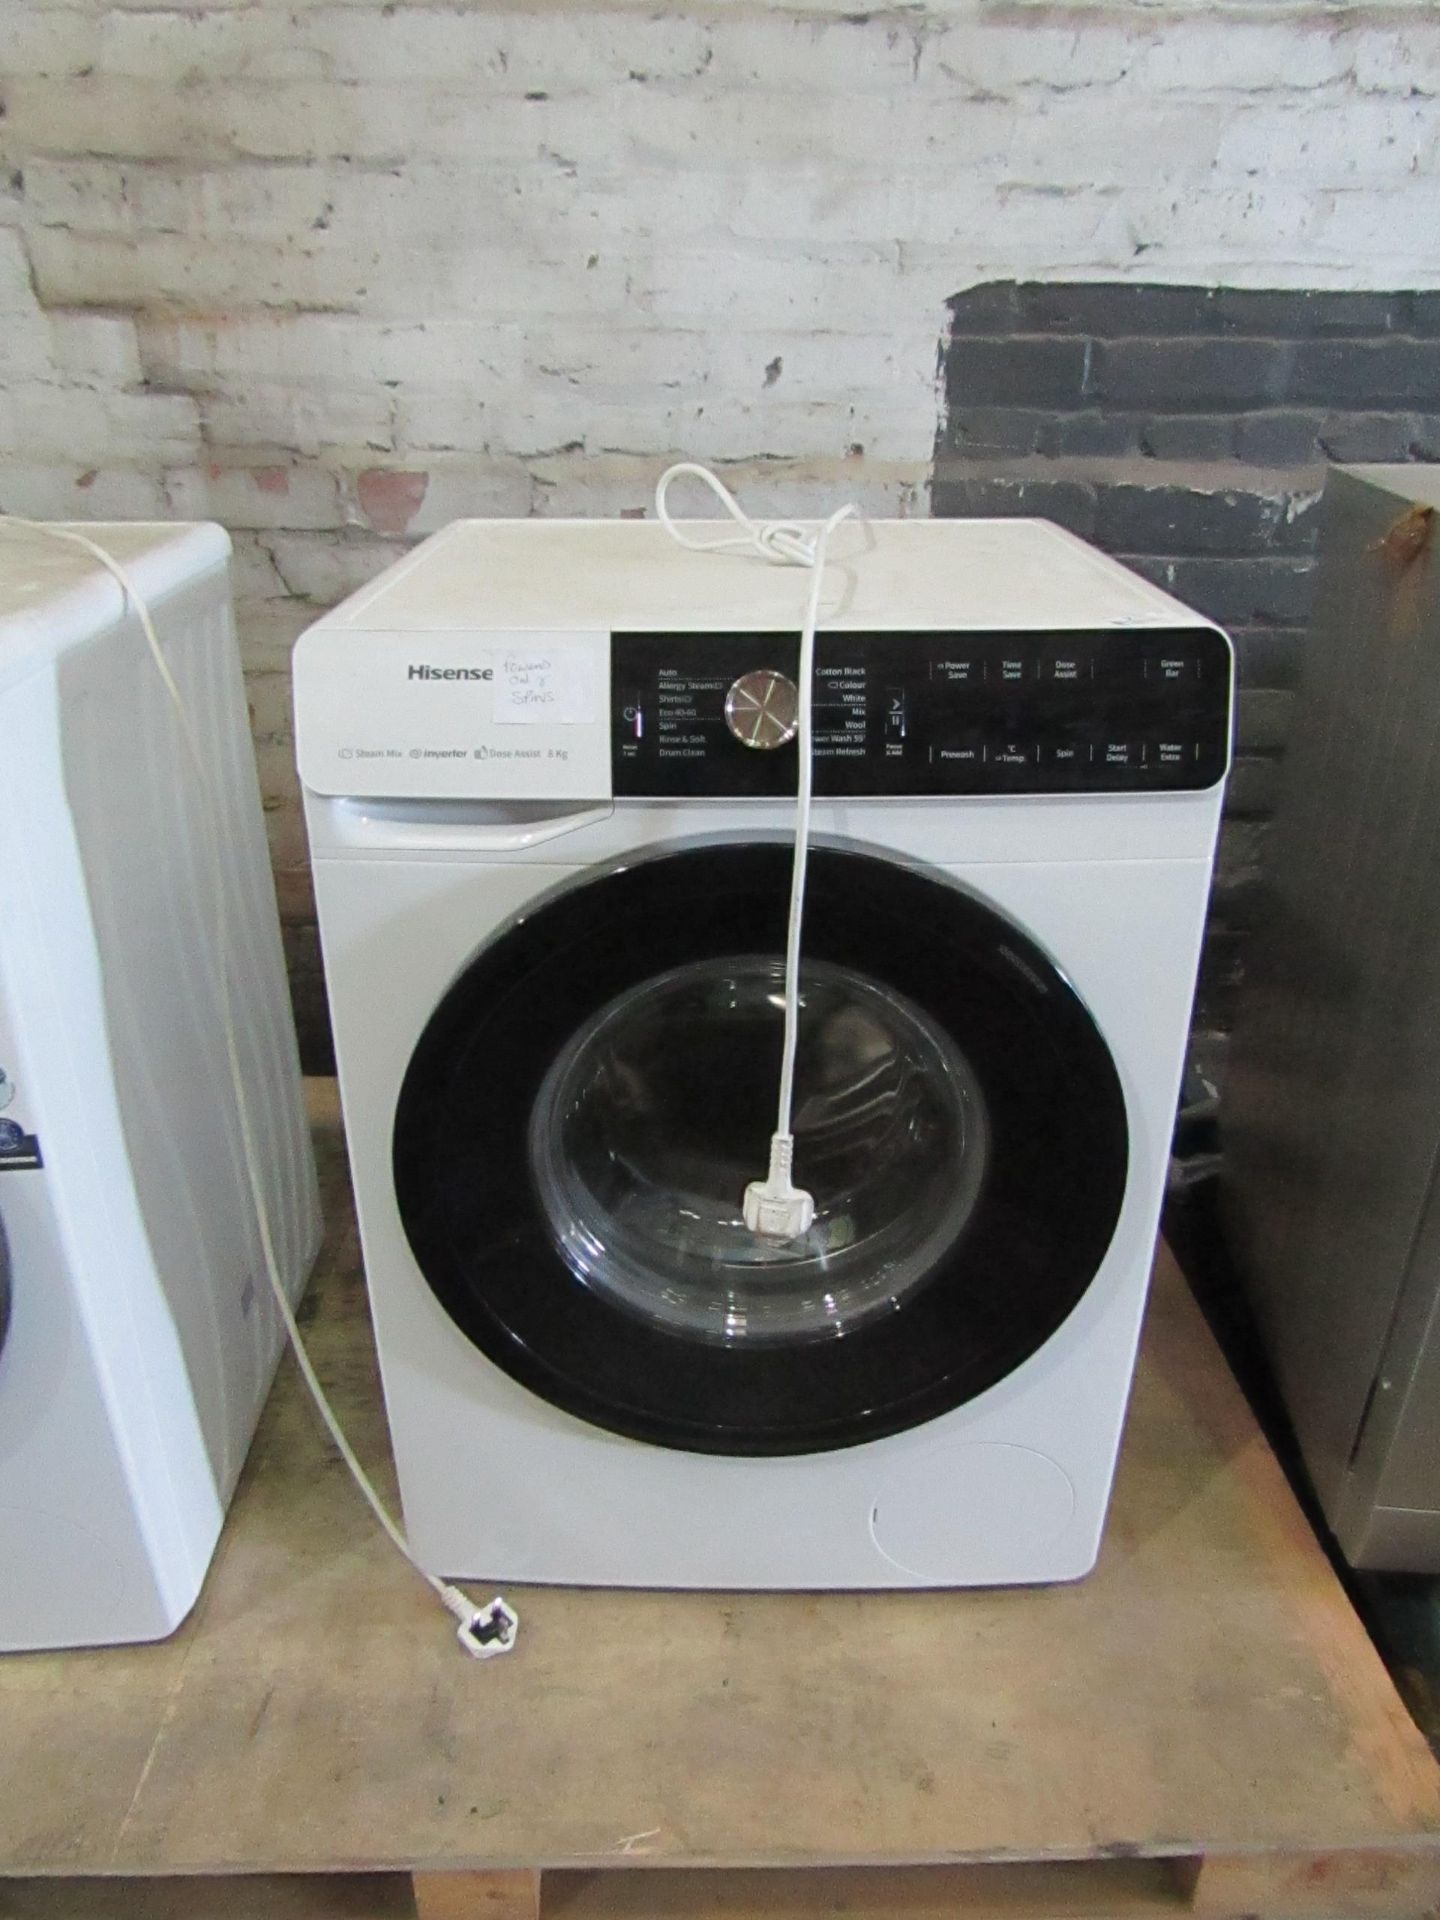 Hisense 8KG washing Machine with dose assist, Powers on and spins but we have not conencted it to